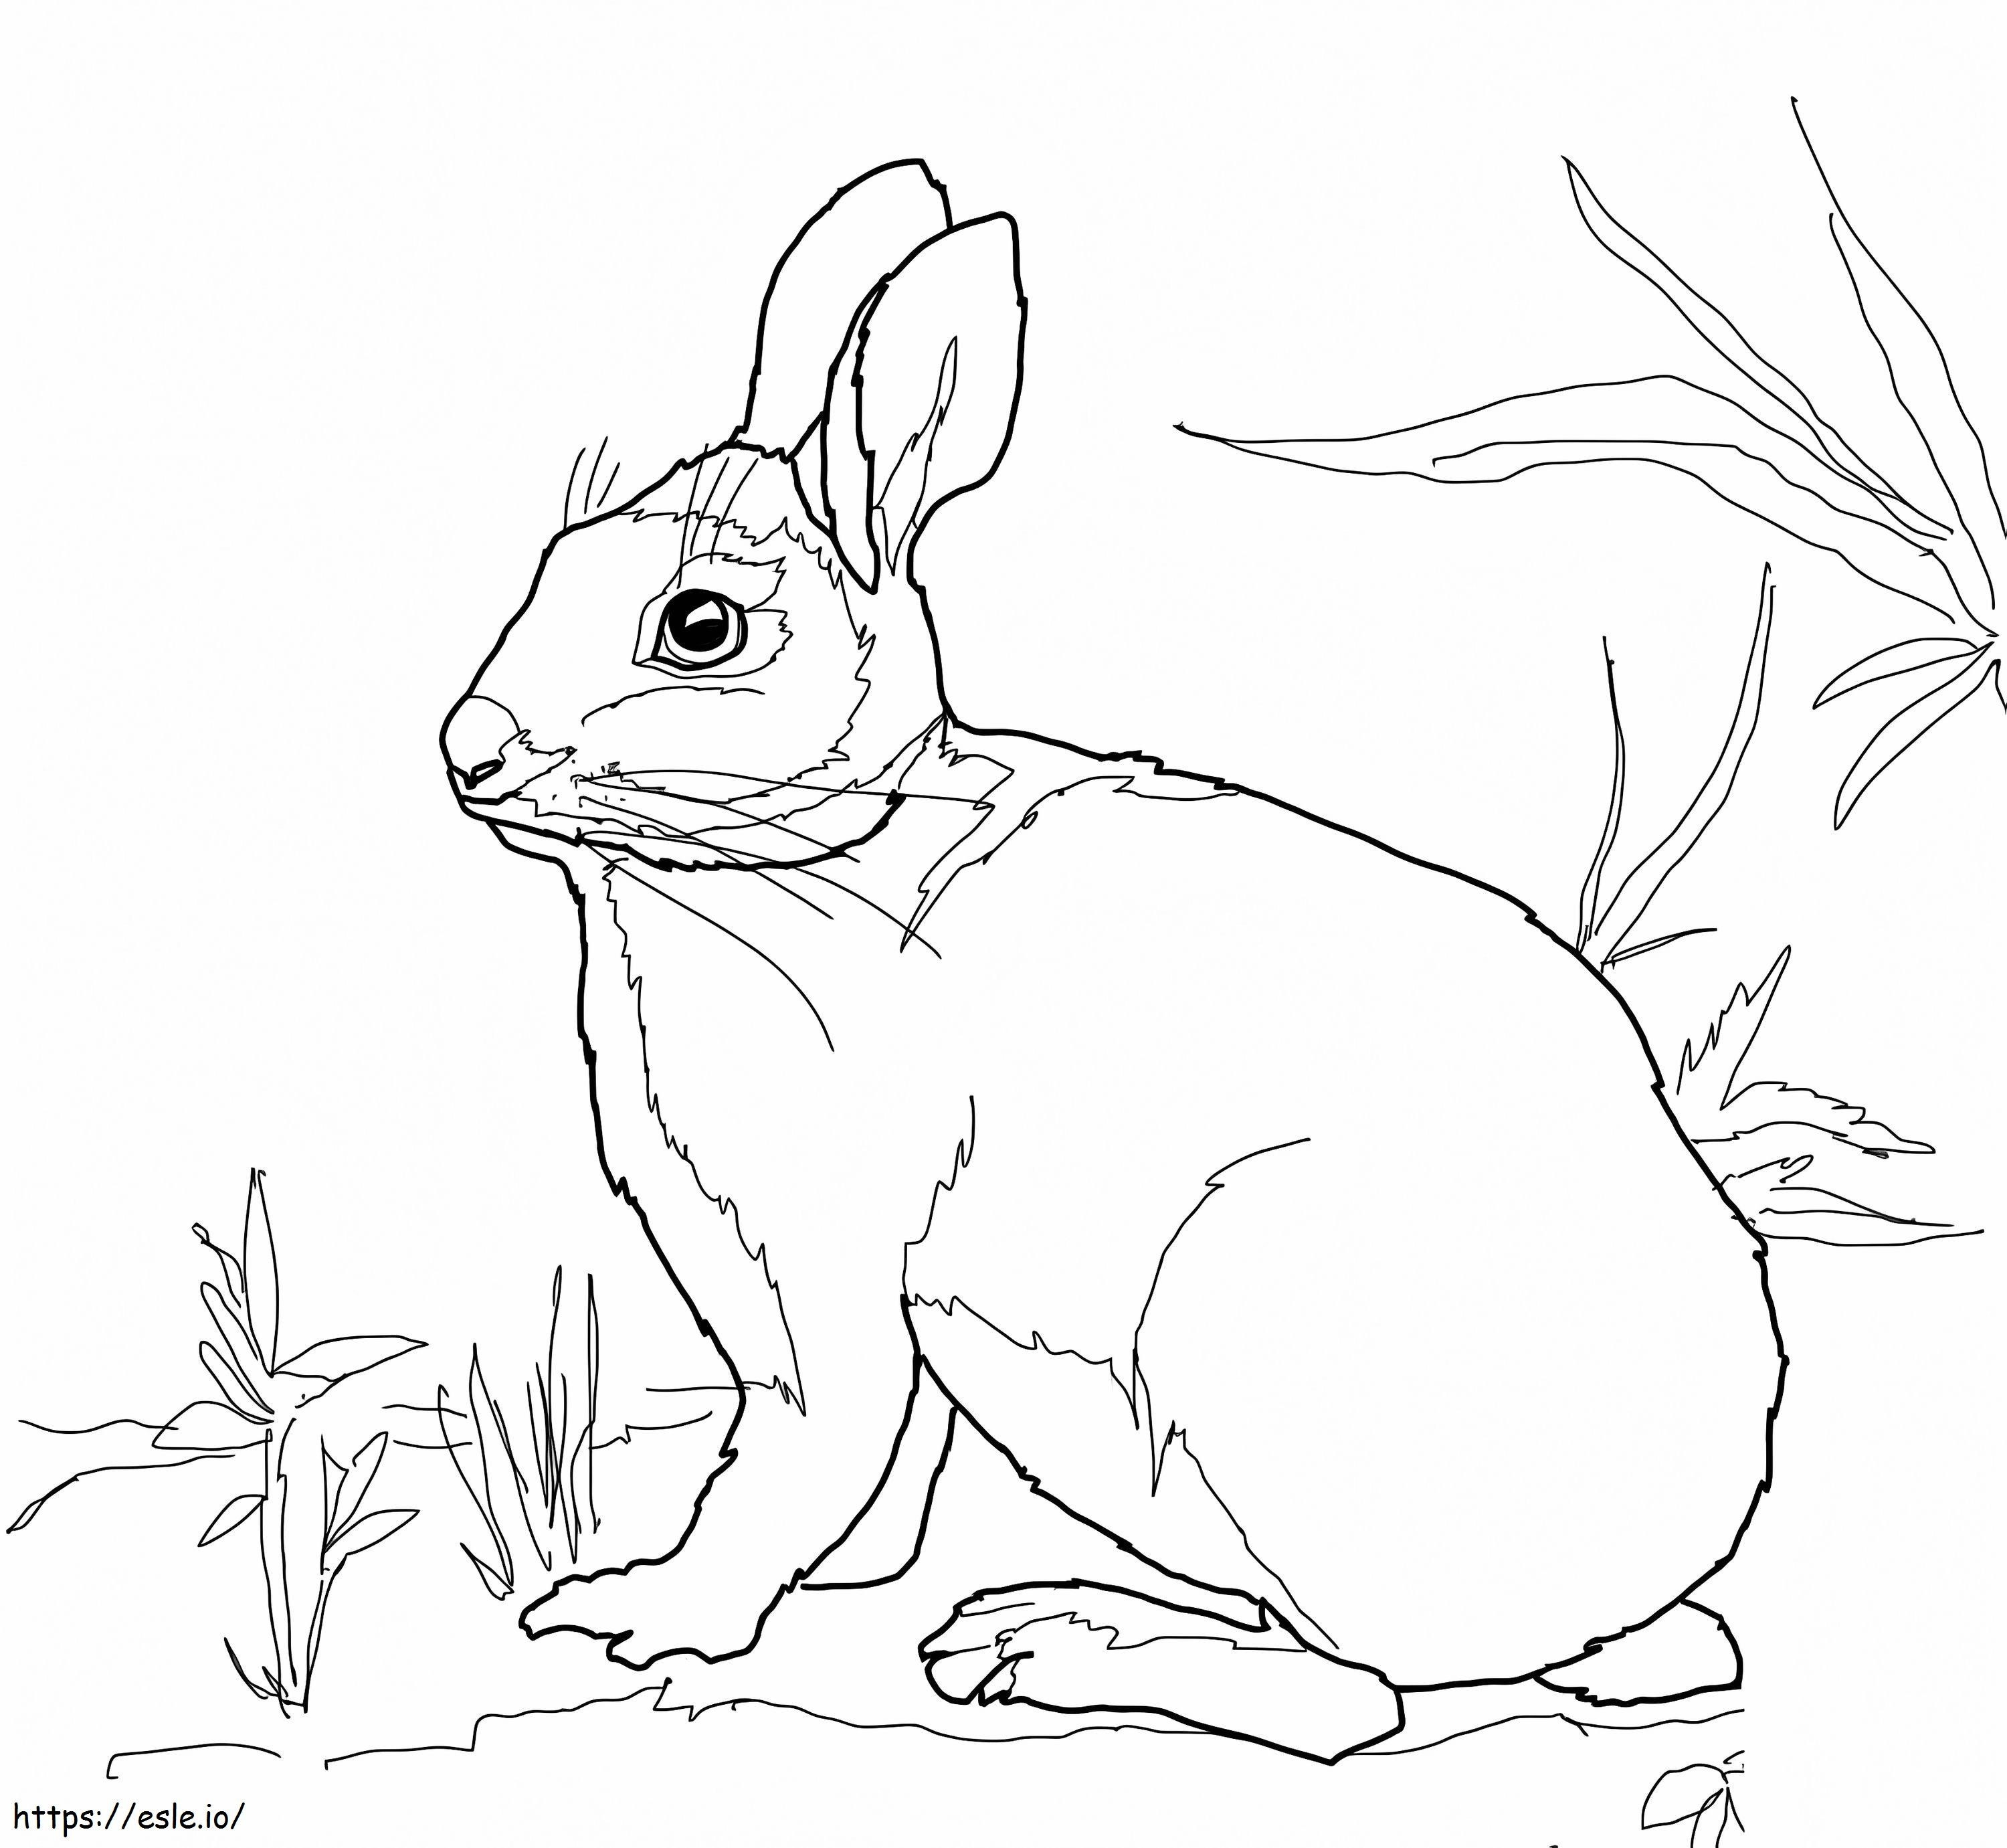 Cottontail Marsh Rabbit coloring page